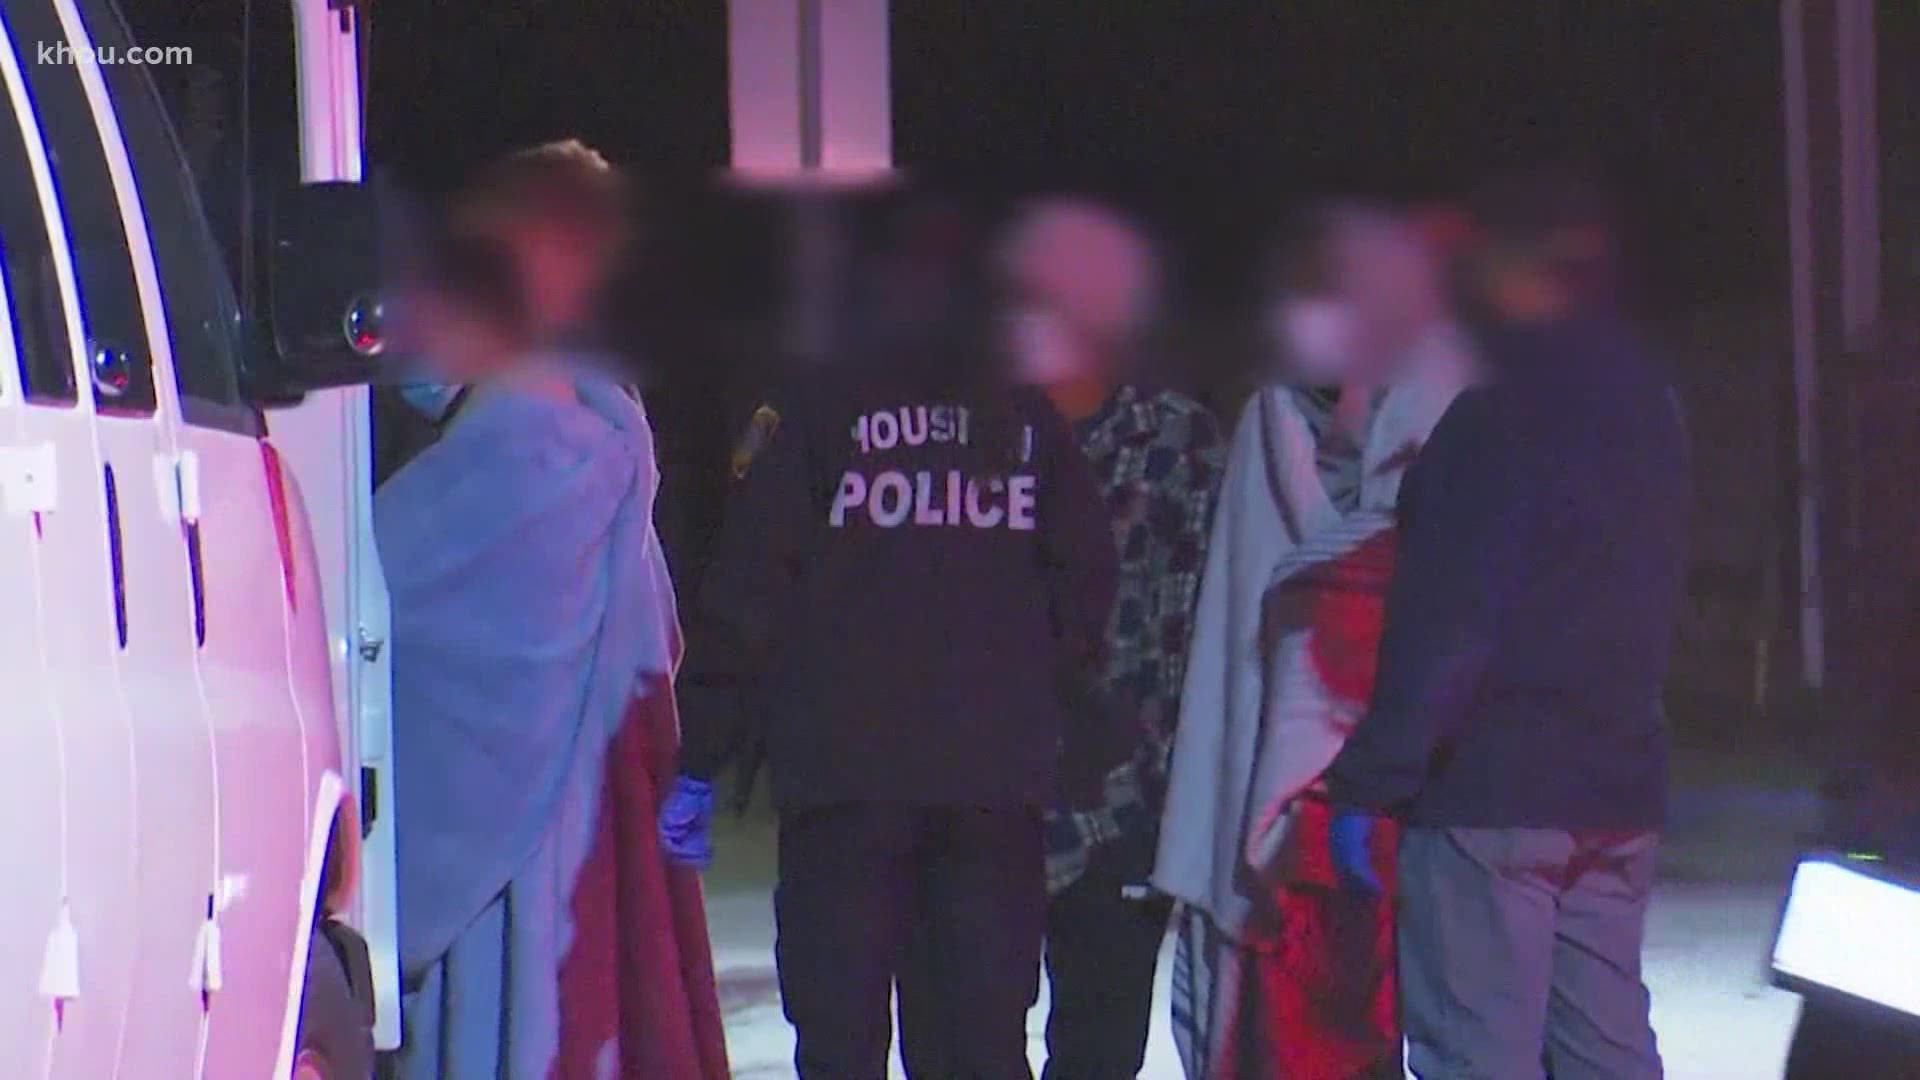 More than two dozen people were found inside a southwest Houston home on Thursday night — held hostage in just their underwear, police said.